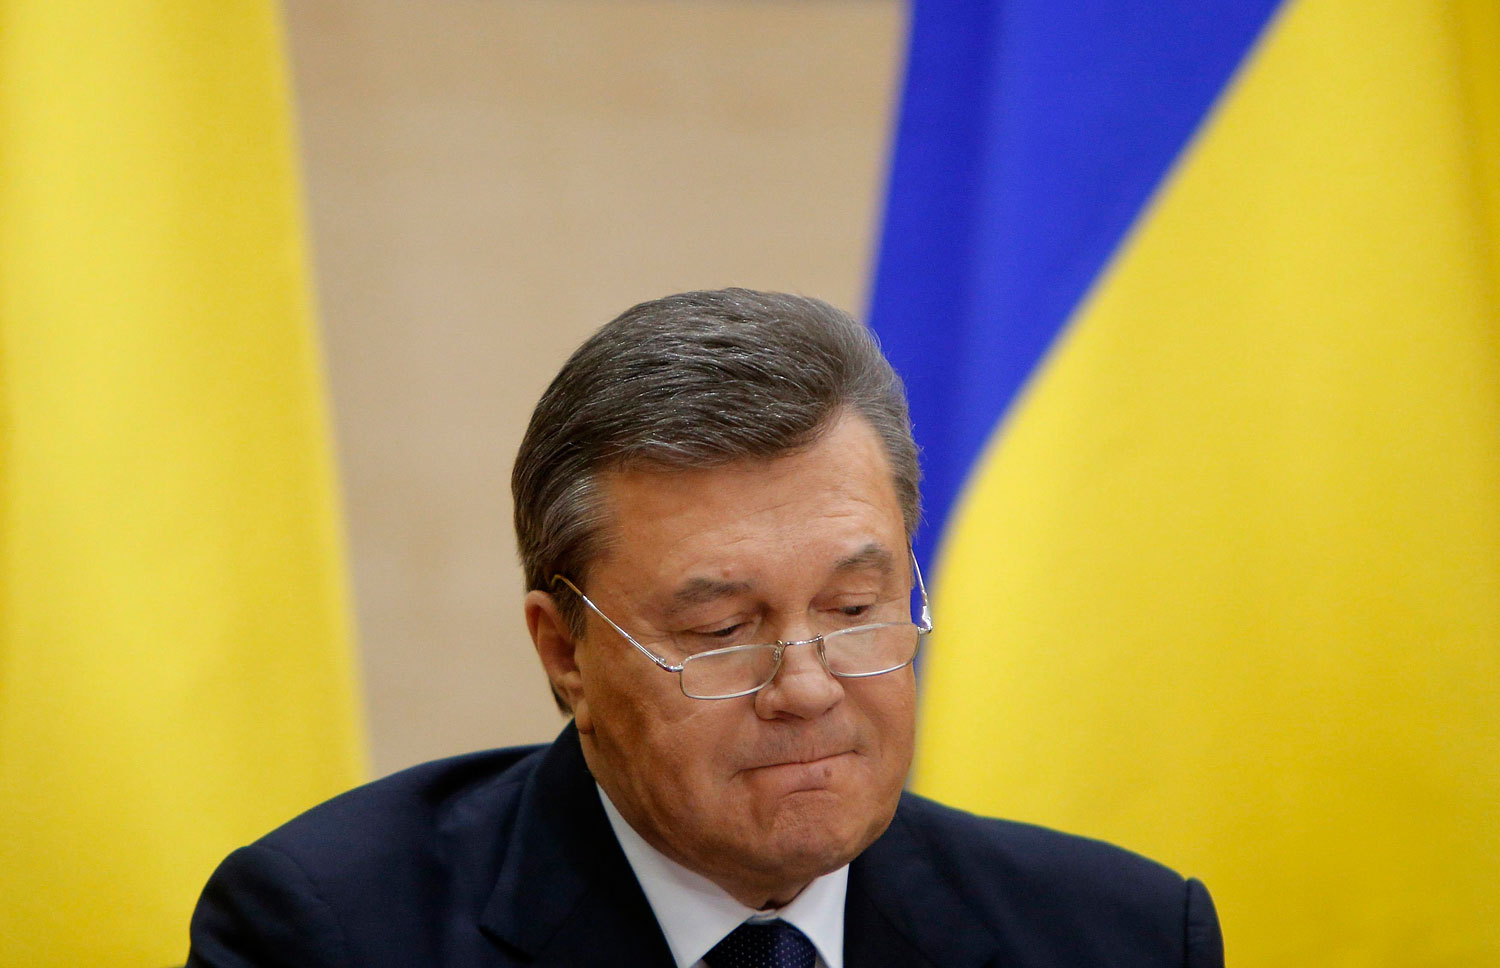 Ousted Ukrainian President Viktor Yanukovich takes part in a news conference in the southern Russian city of Rostov-on-Don